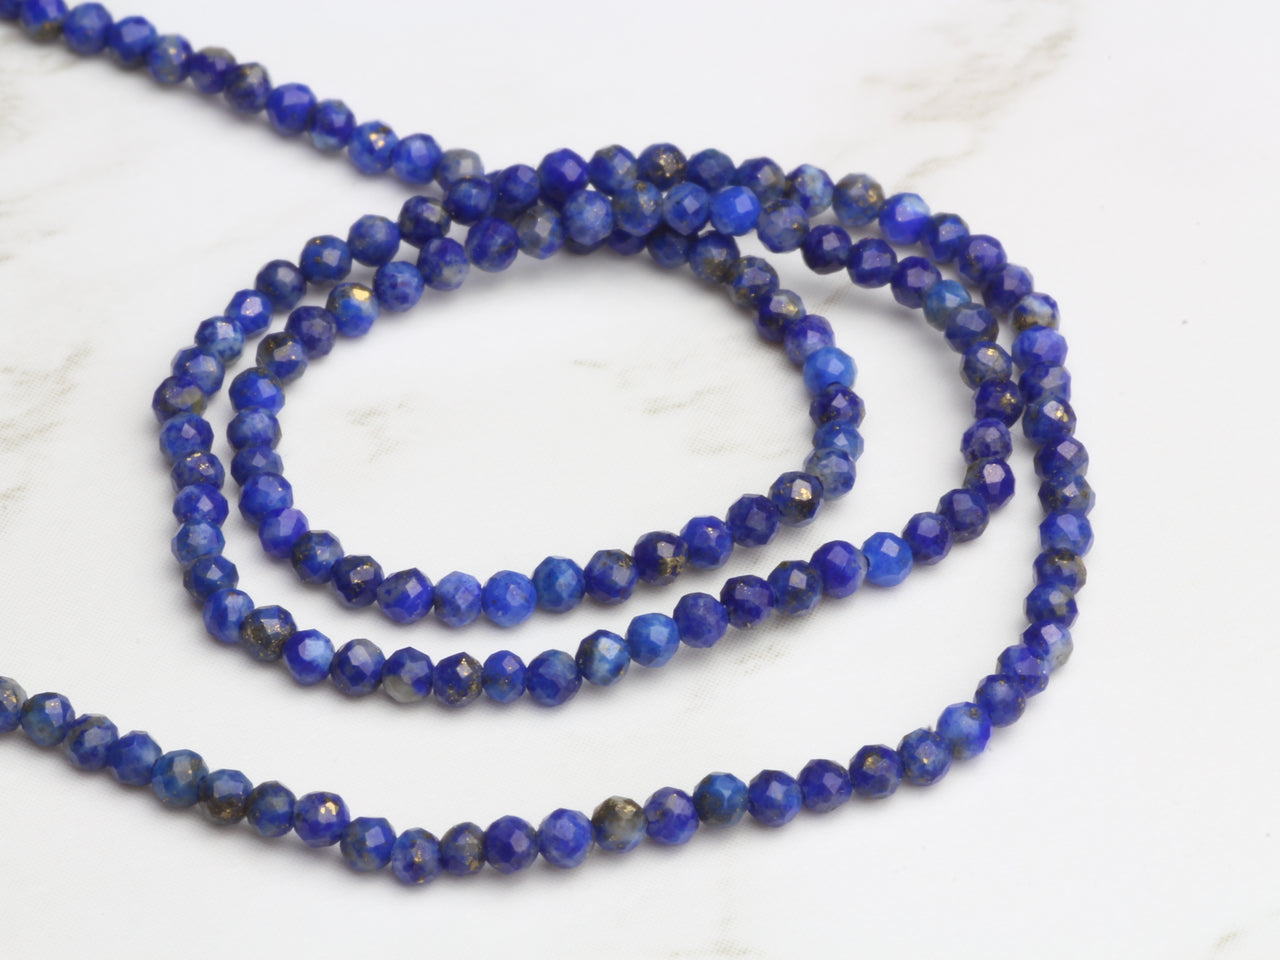 Dark Blue Lapis Lazuli 2mm Faceted Rounds 13" Bead Strand